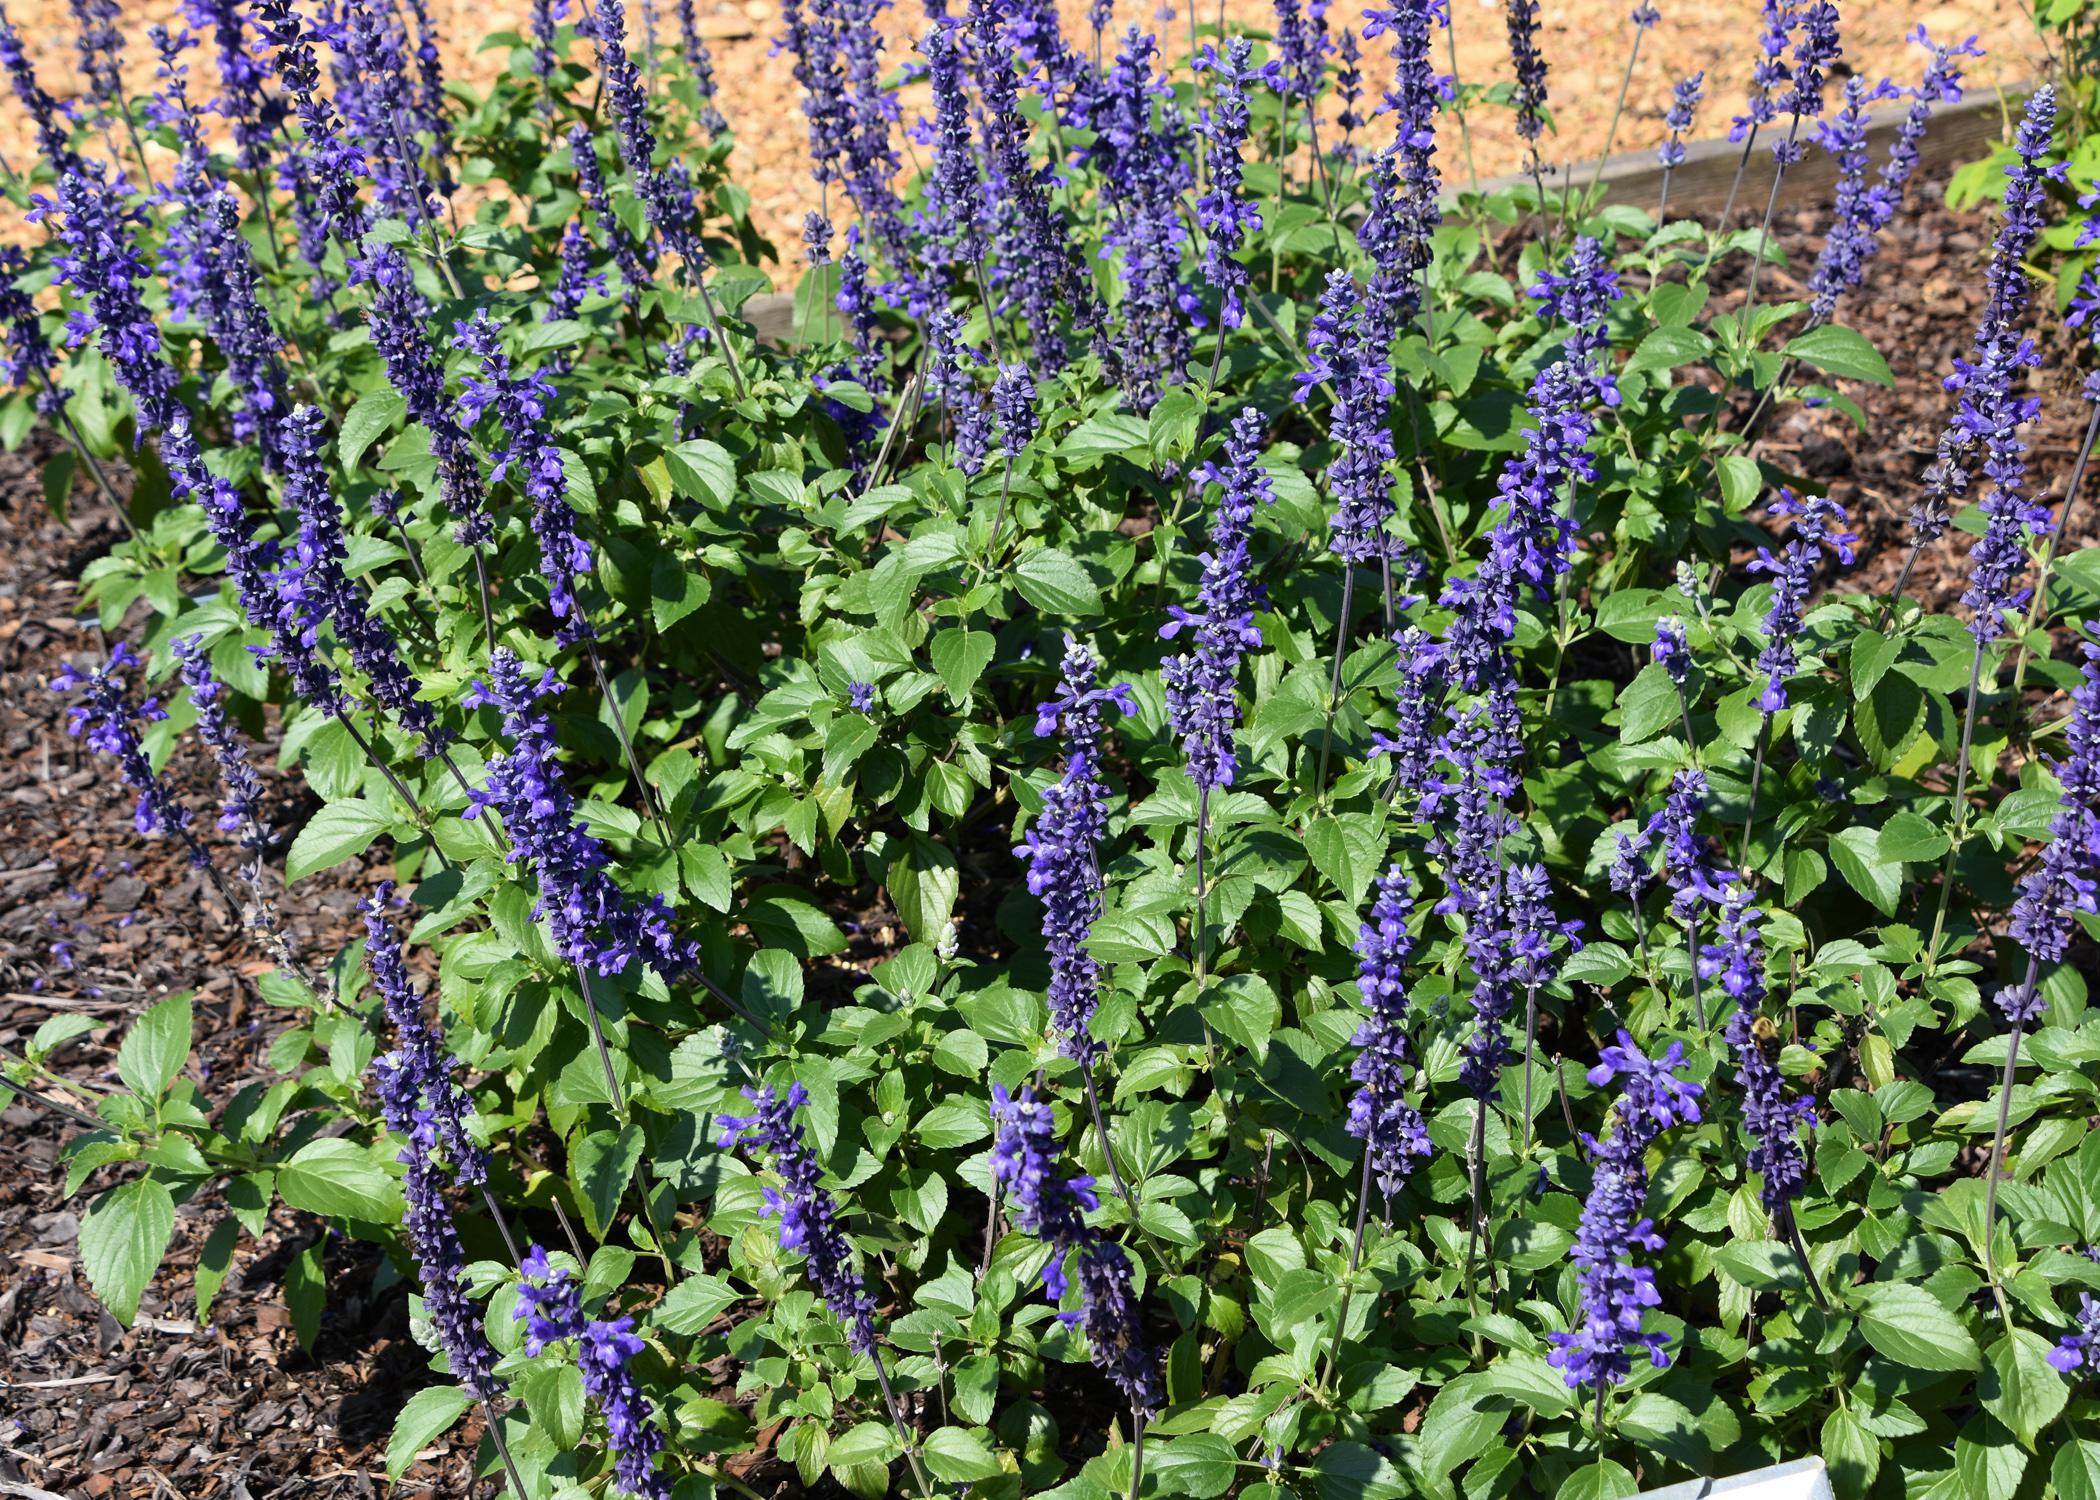 Spikes of purple flowers extend from green foliage.